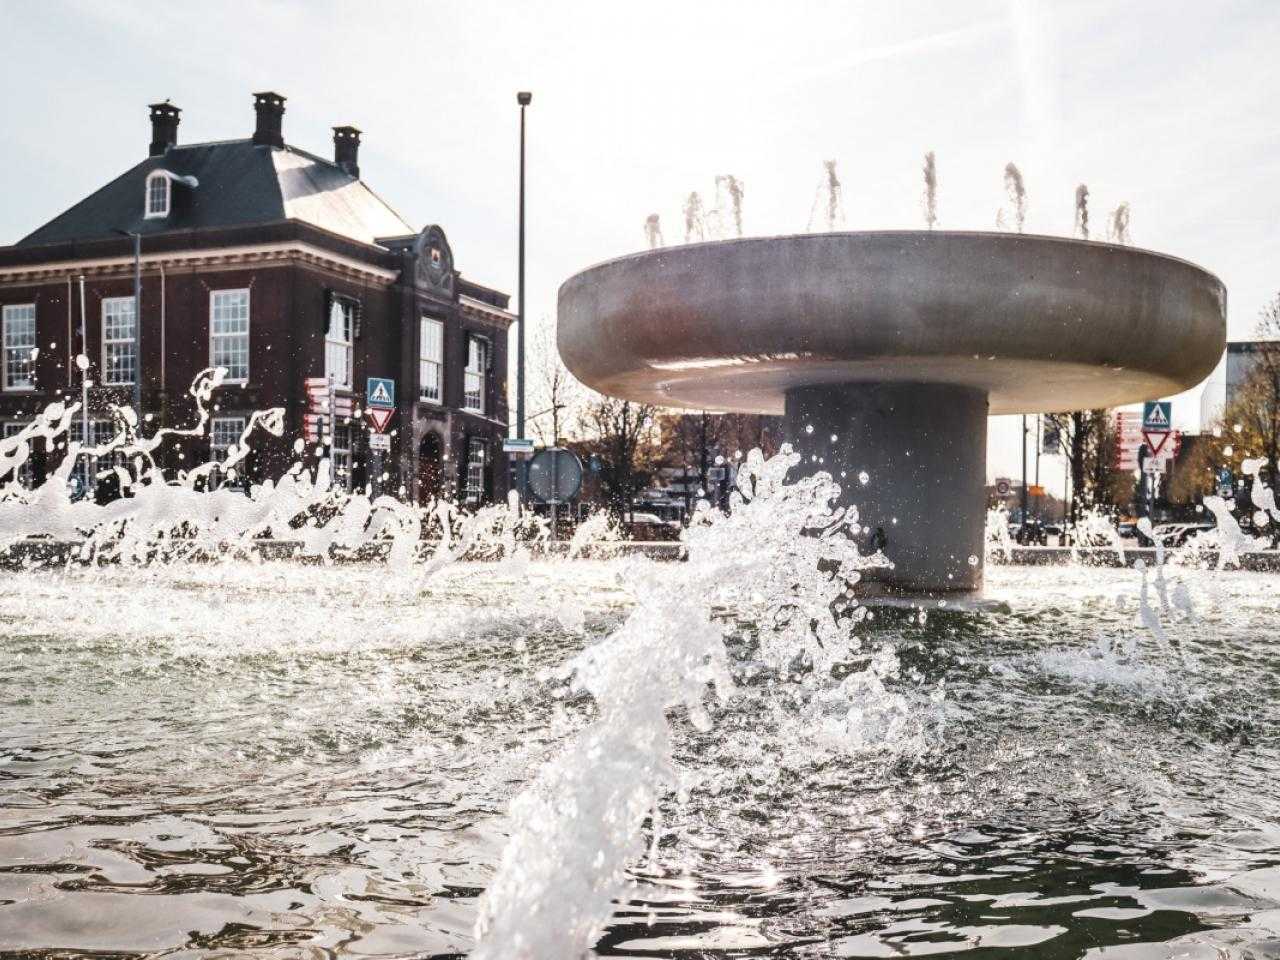 Fountain and Polderhuis in the background.